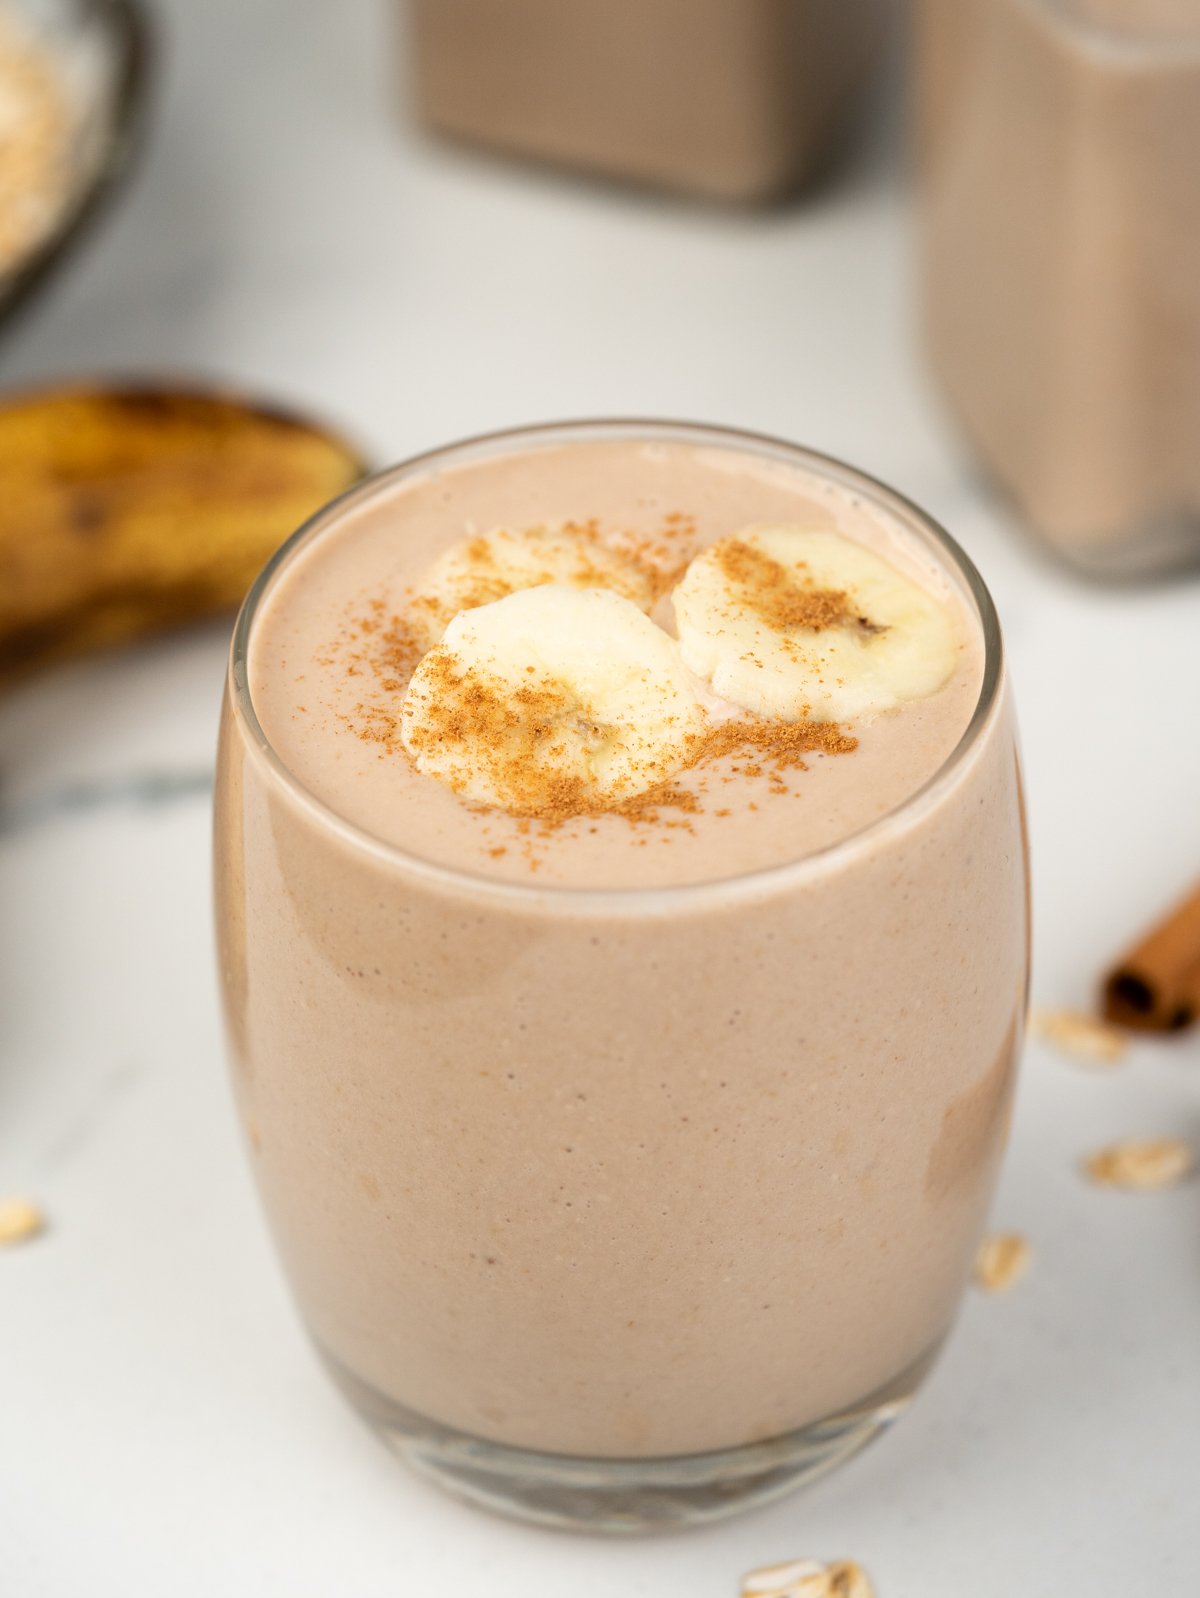 A thick smooth blend of ripe bananas, rolled oats, and almond milk, with hints of spice from cinnamon and sweet maple syrup, 